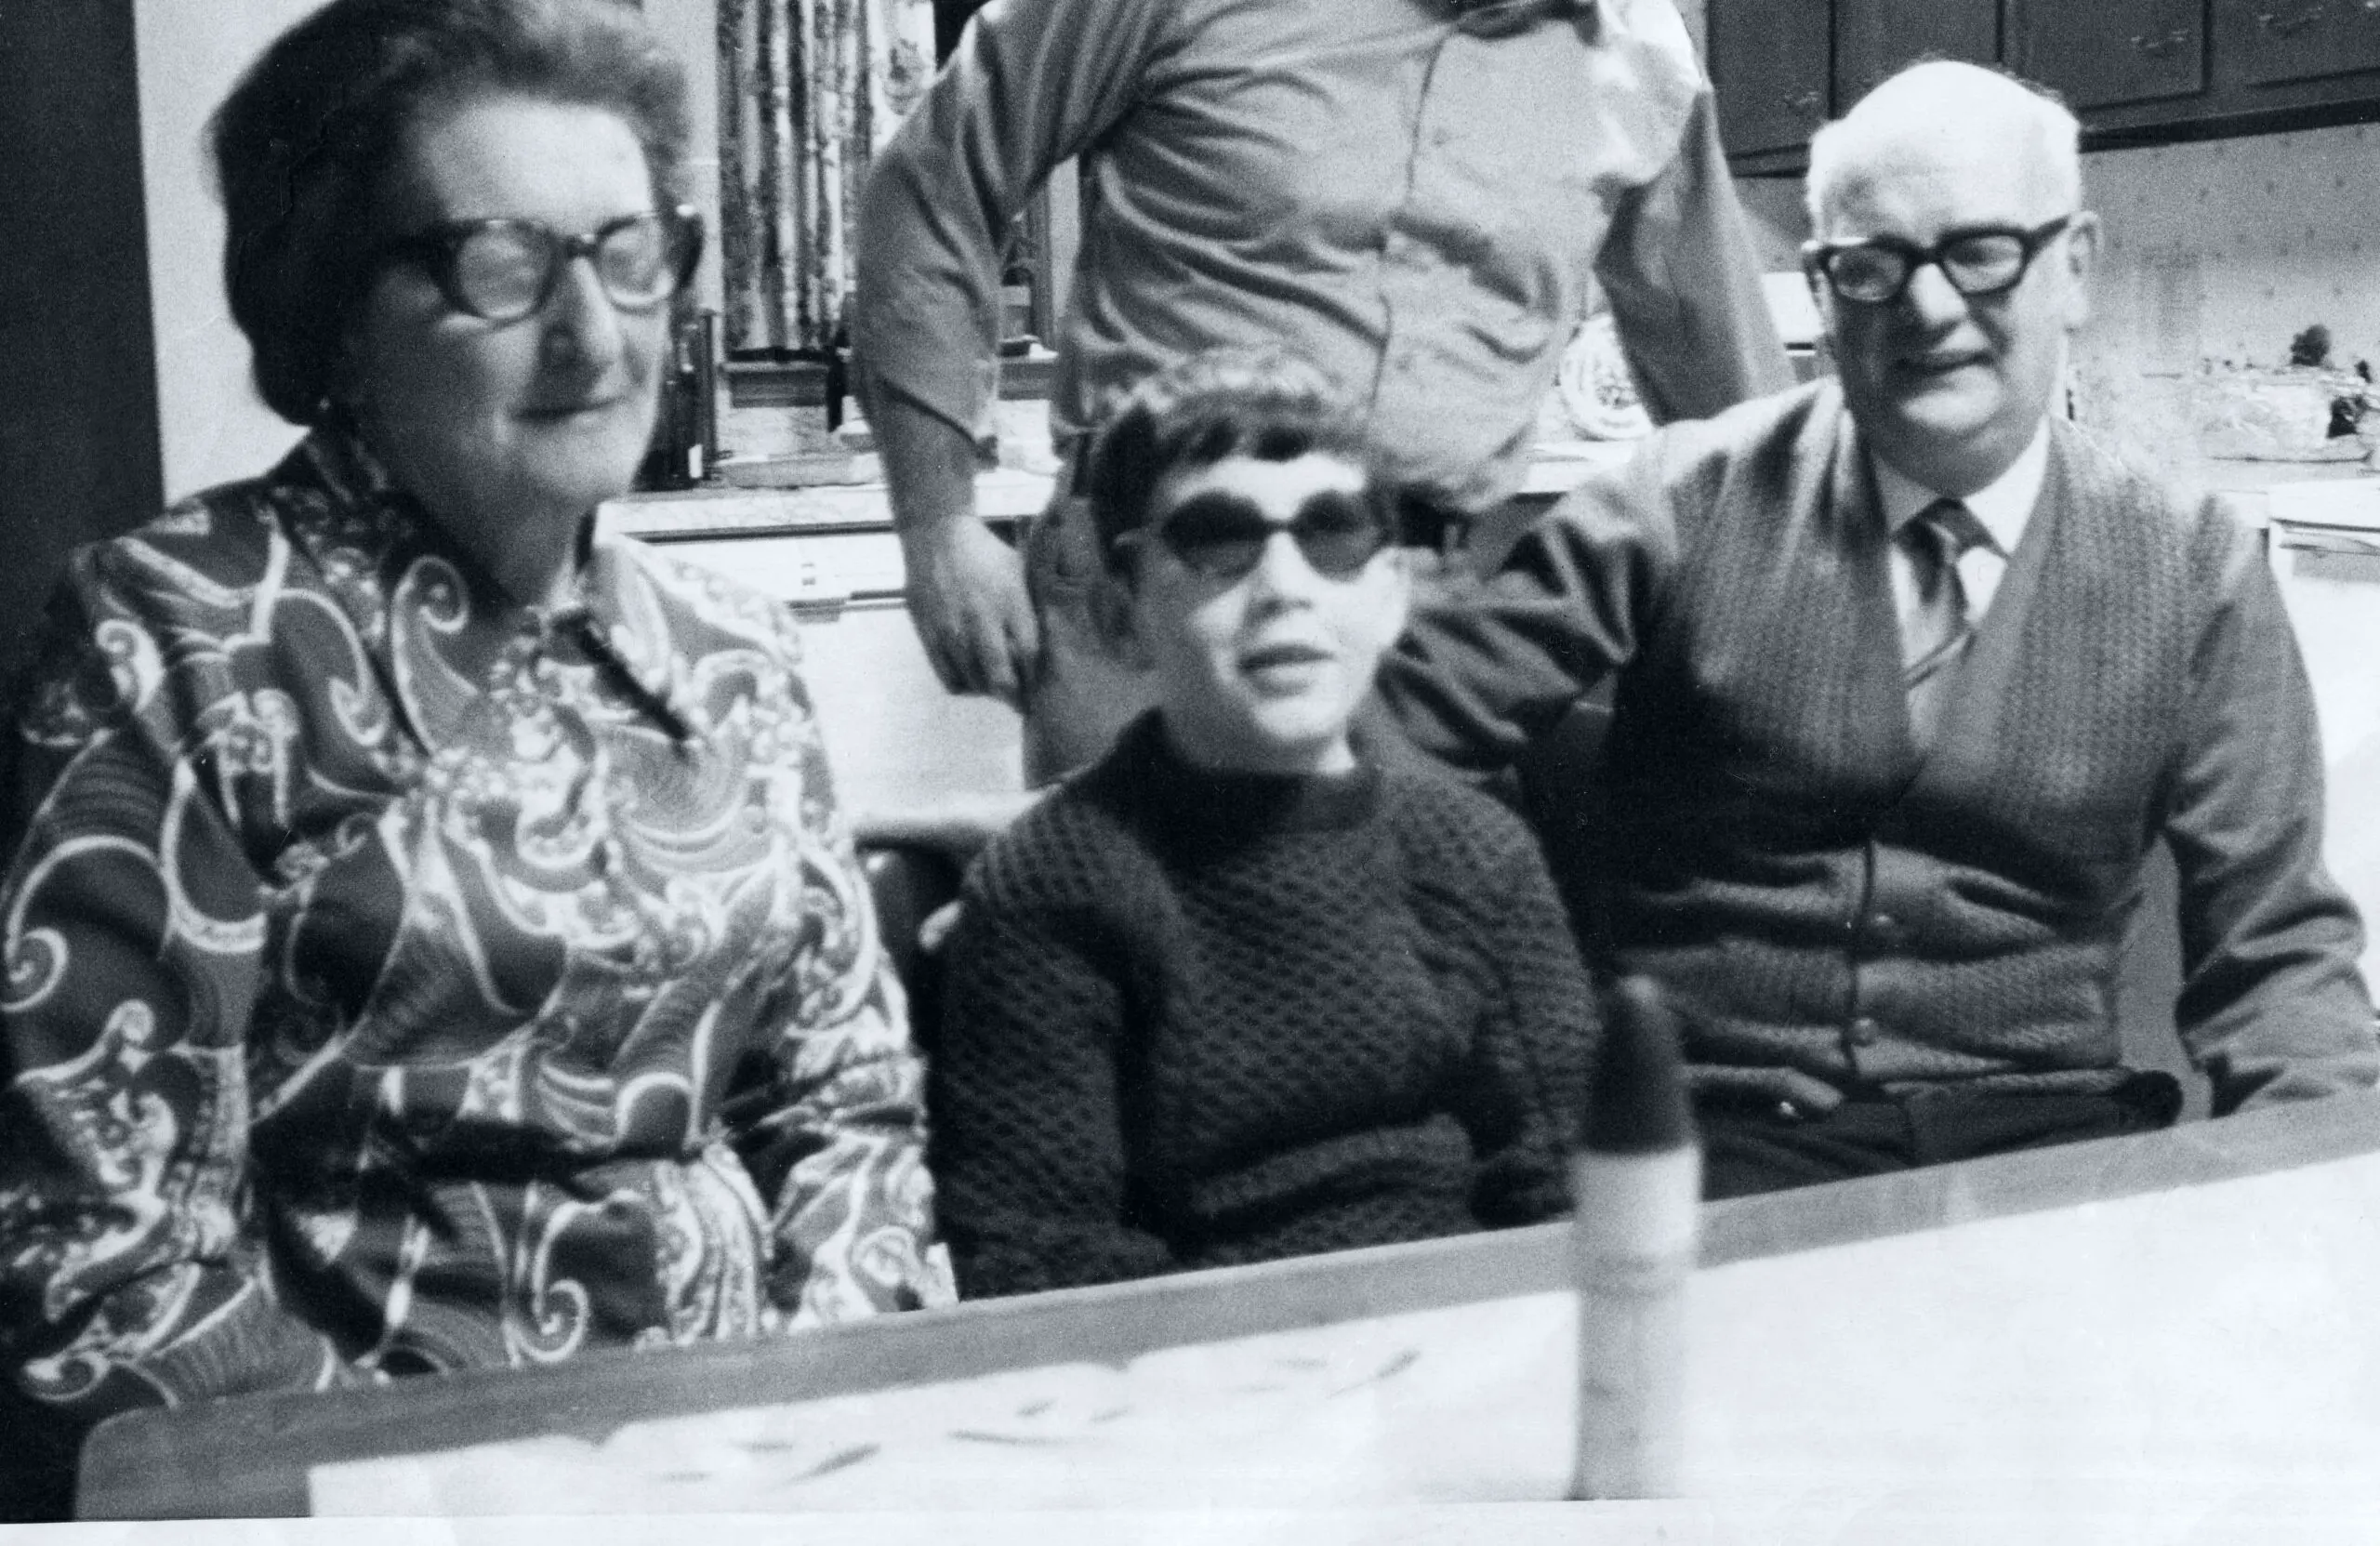 Moore with his parents in Boston, Mass., where they traveled in the hope of restoring his eyesight in January 1973. The rubber bullet that blinded him sits on the table in front of them.